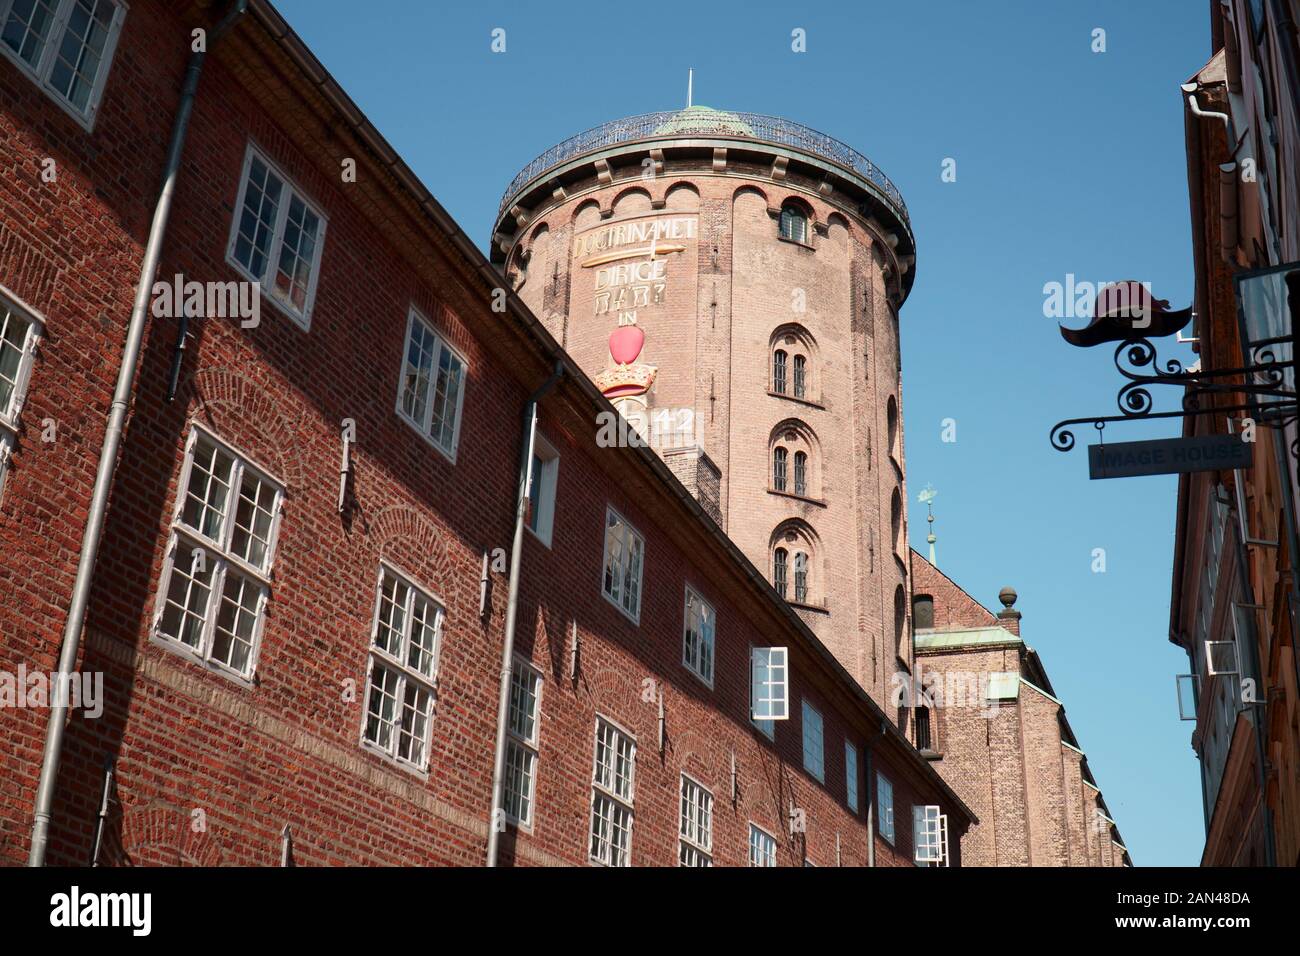 The Round Tower in Copenhagen, Denmark, as viewed from a street below Stock Photo